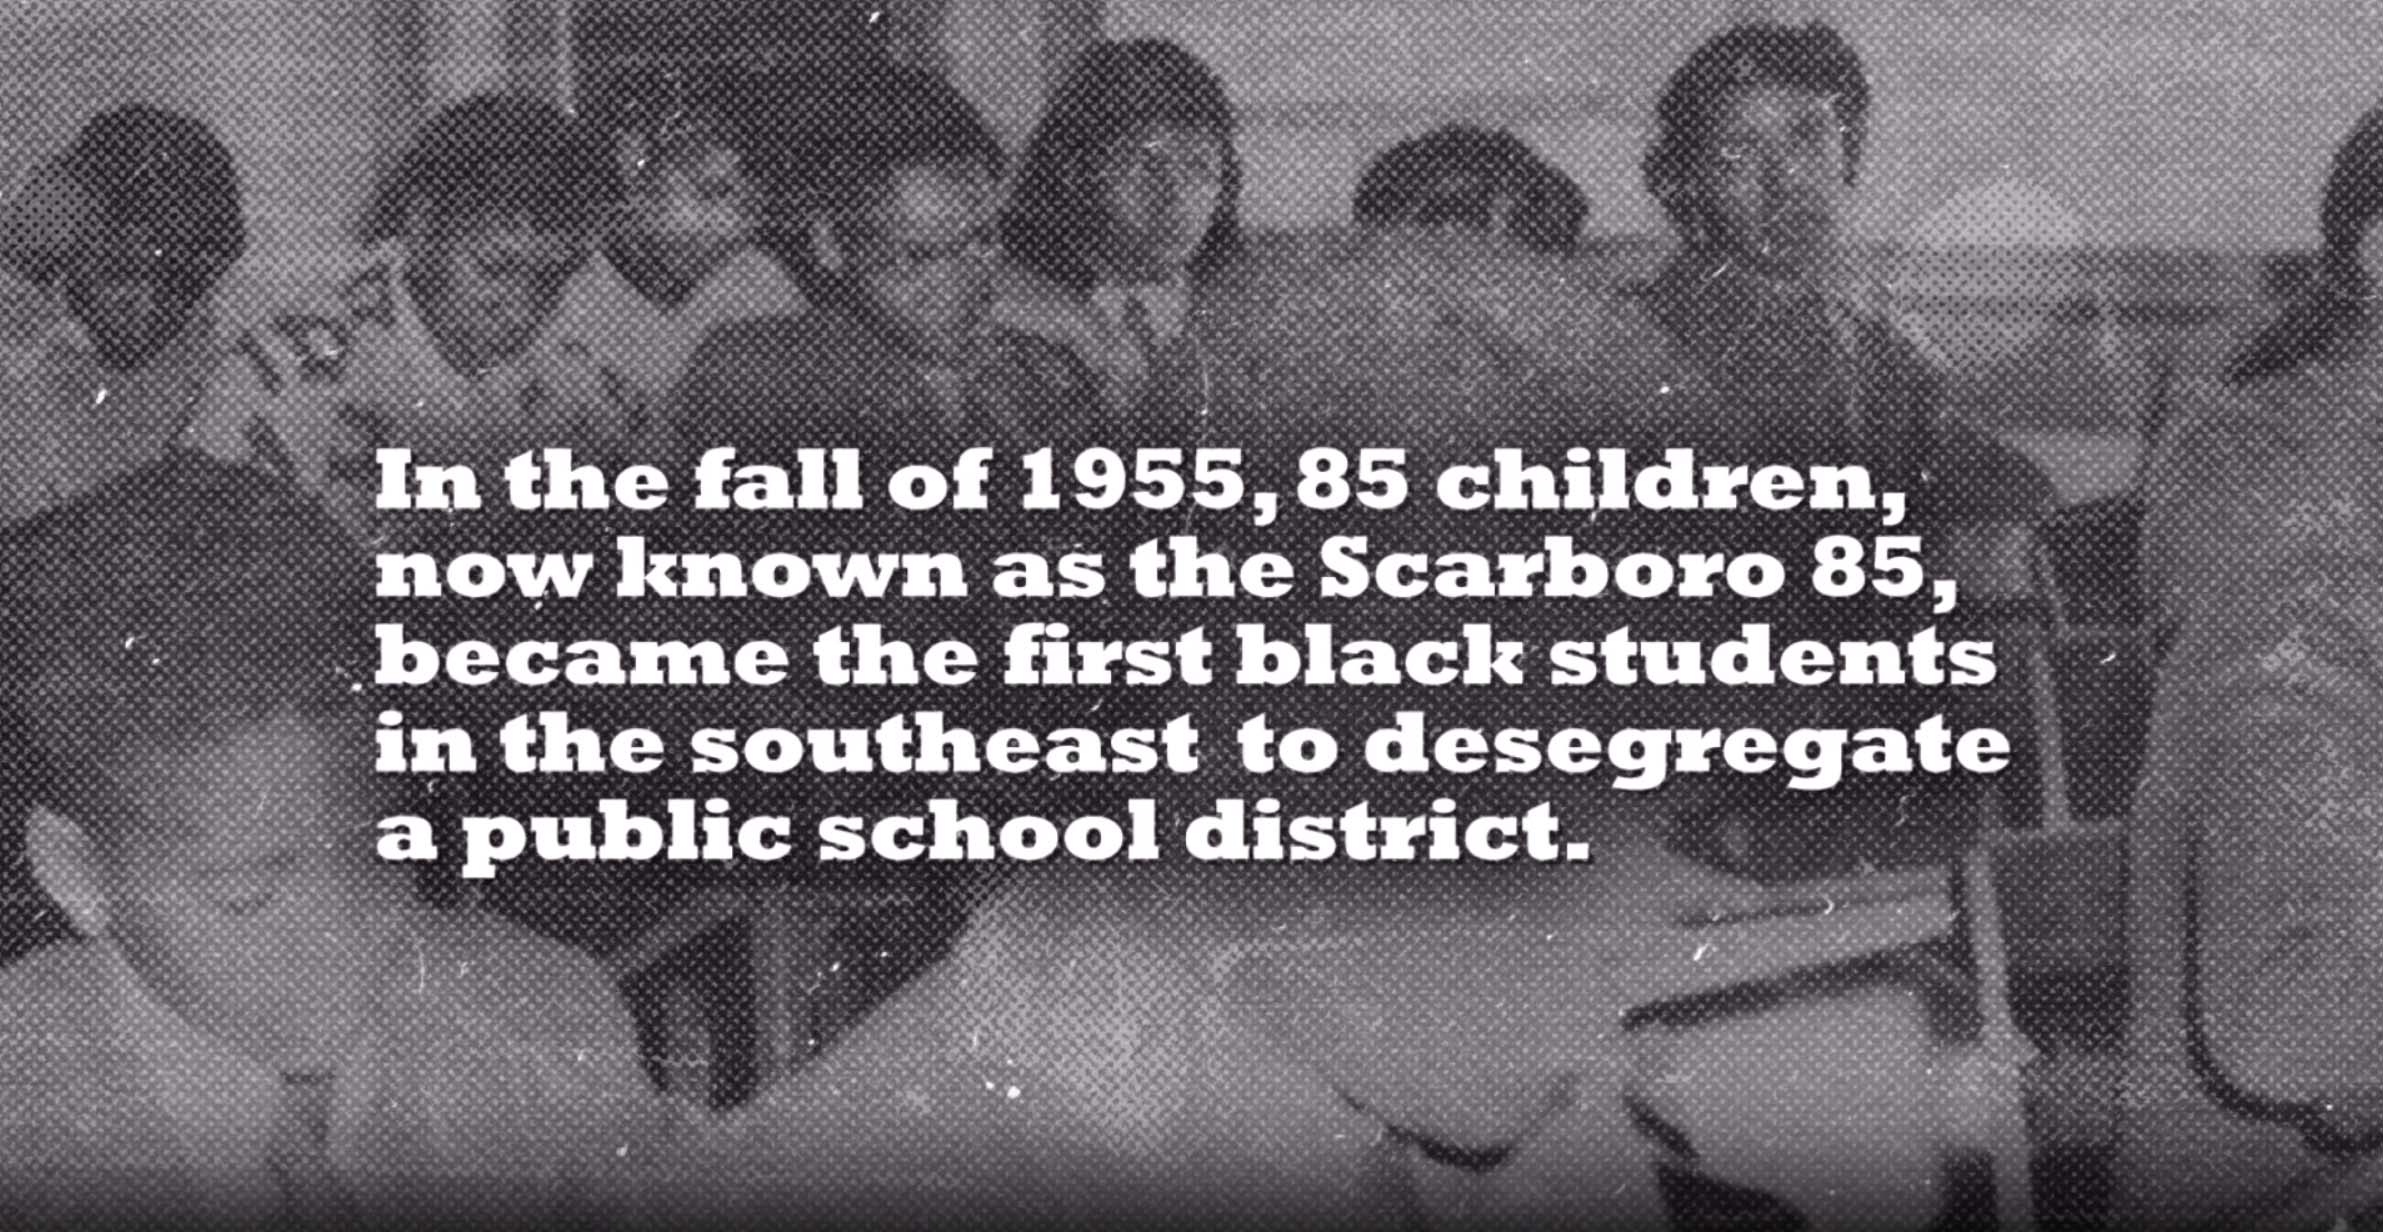 Honoring the legacy of the Scarboro 85